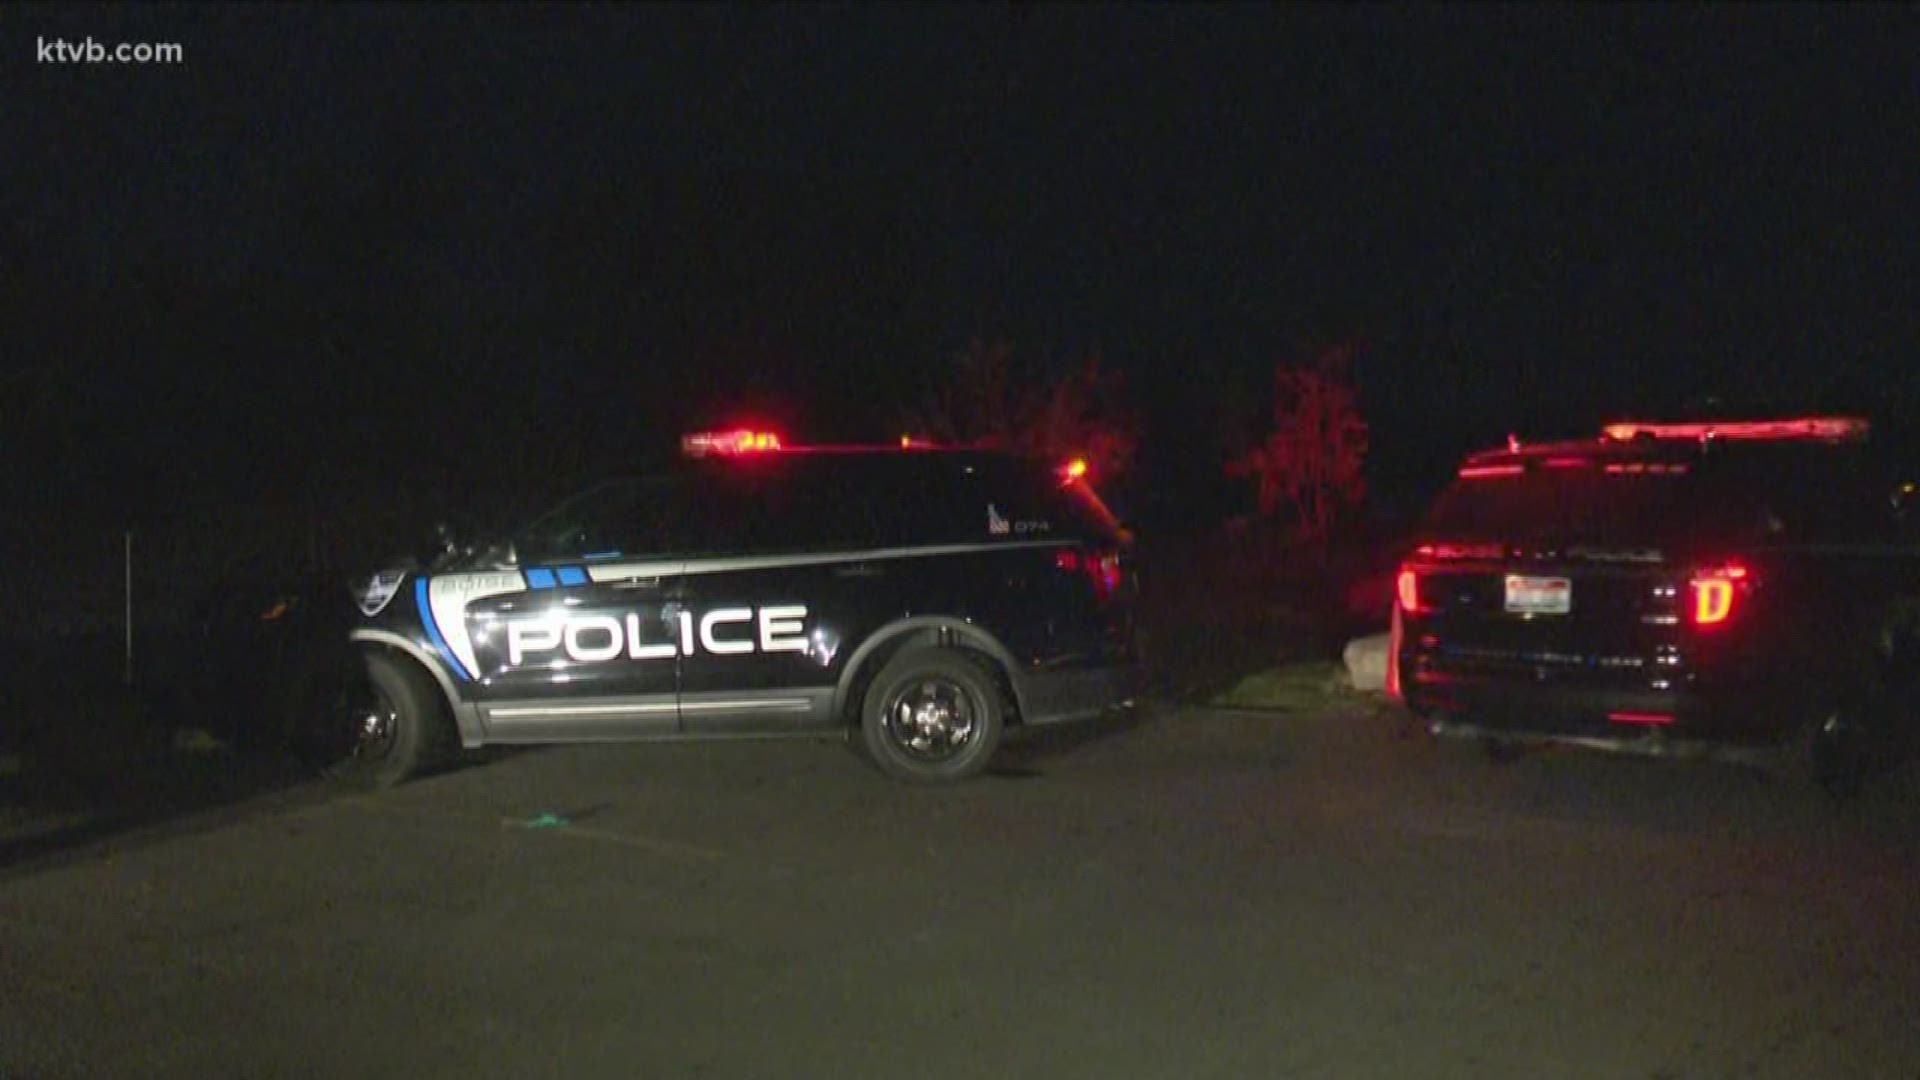 Police say the juvenile male suspect ran away from the scene, but was found a short time later near the Boise River.